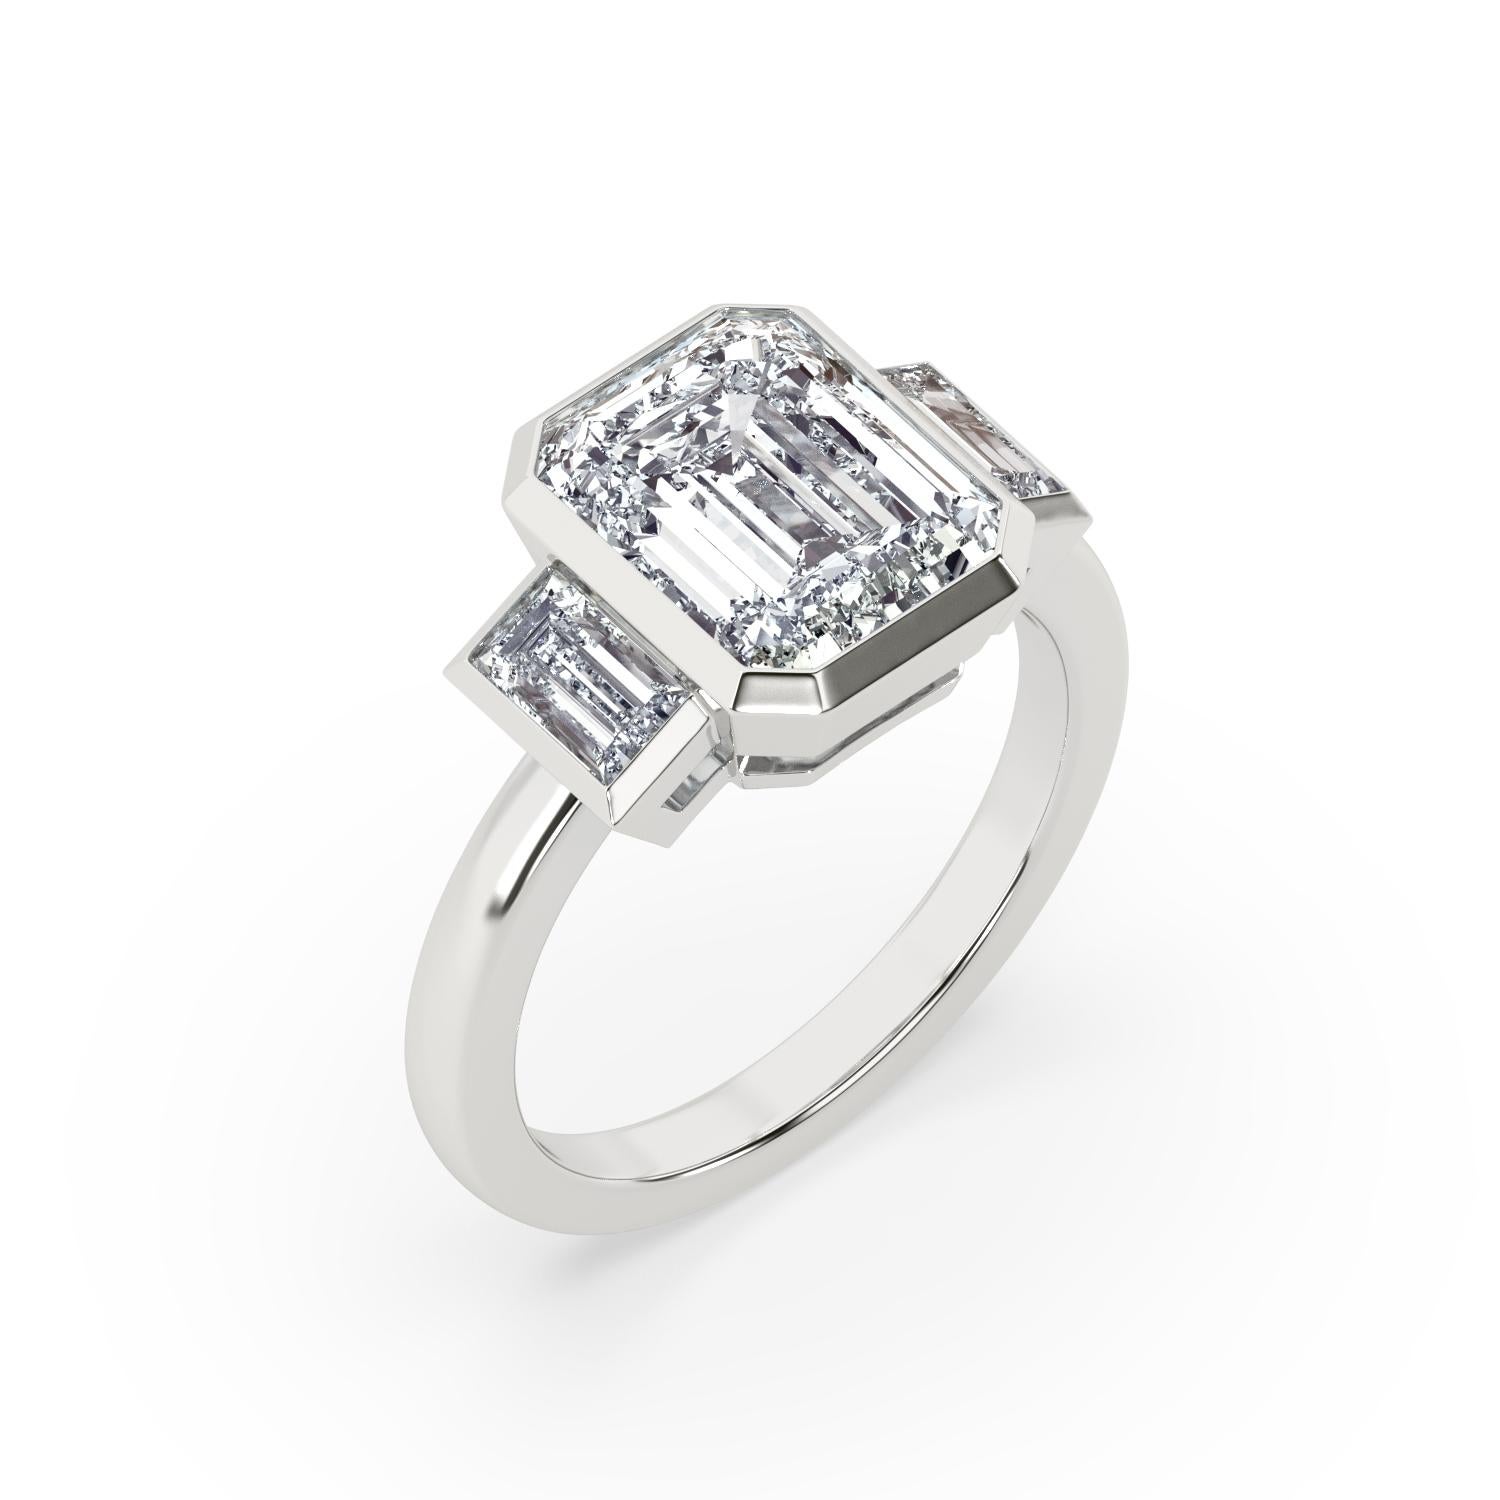 2 carat GIA certified emerald cut diamond engagement ring with G color and VS2 clarity (**this ring can be made with a different diamond to accommodate your budget and taste, please contact for more details). 2 side stones of matching quality sit on